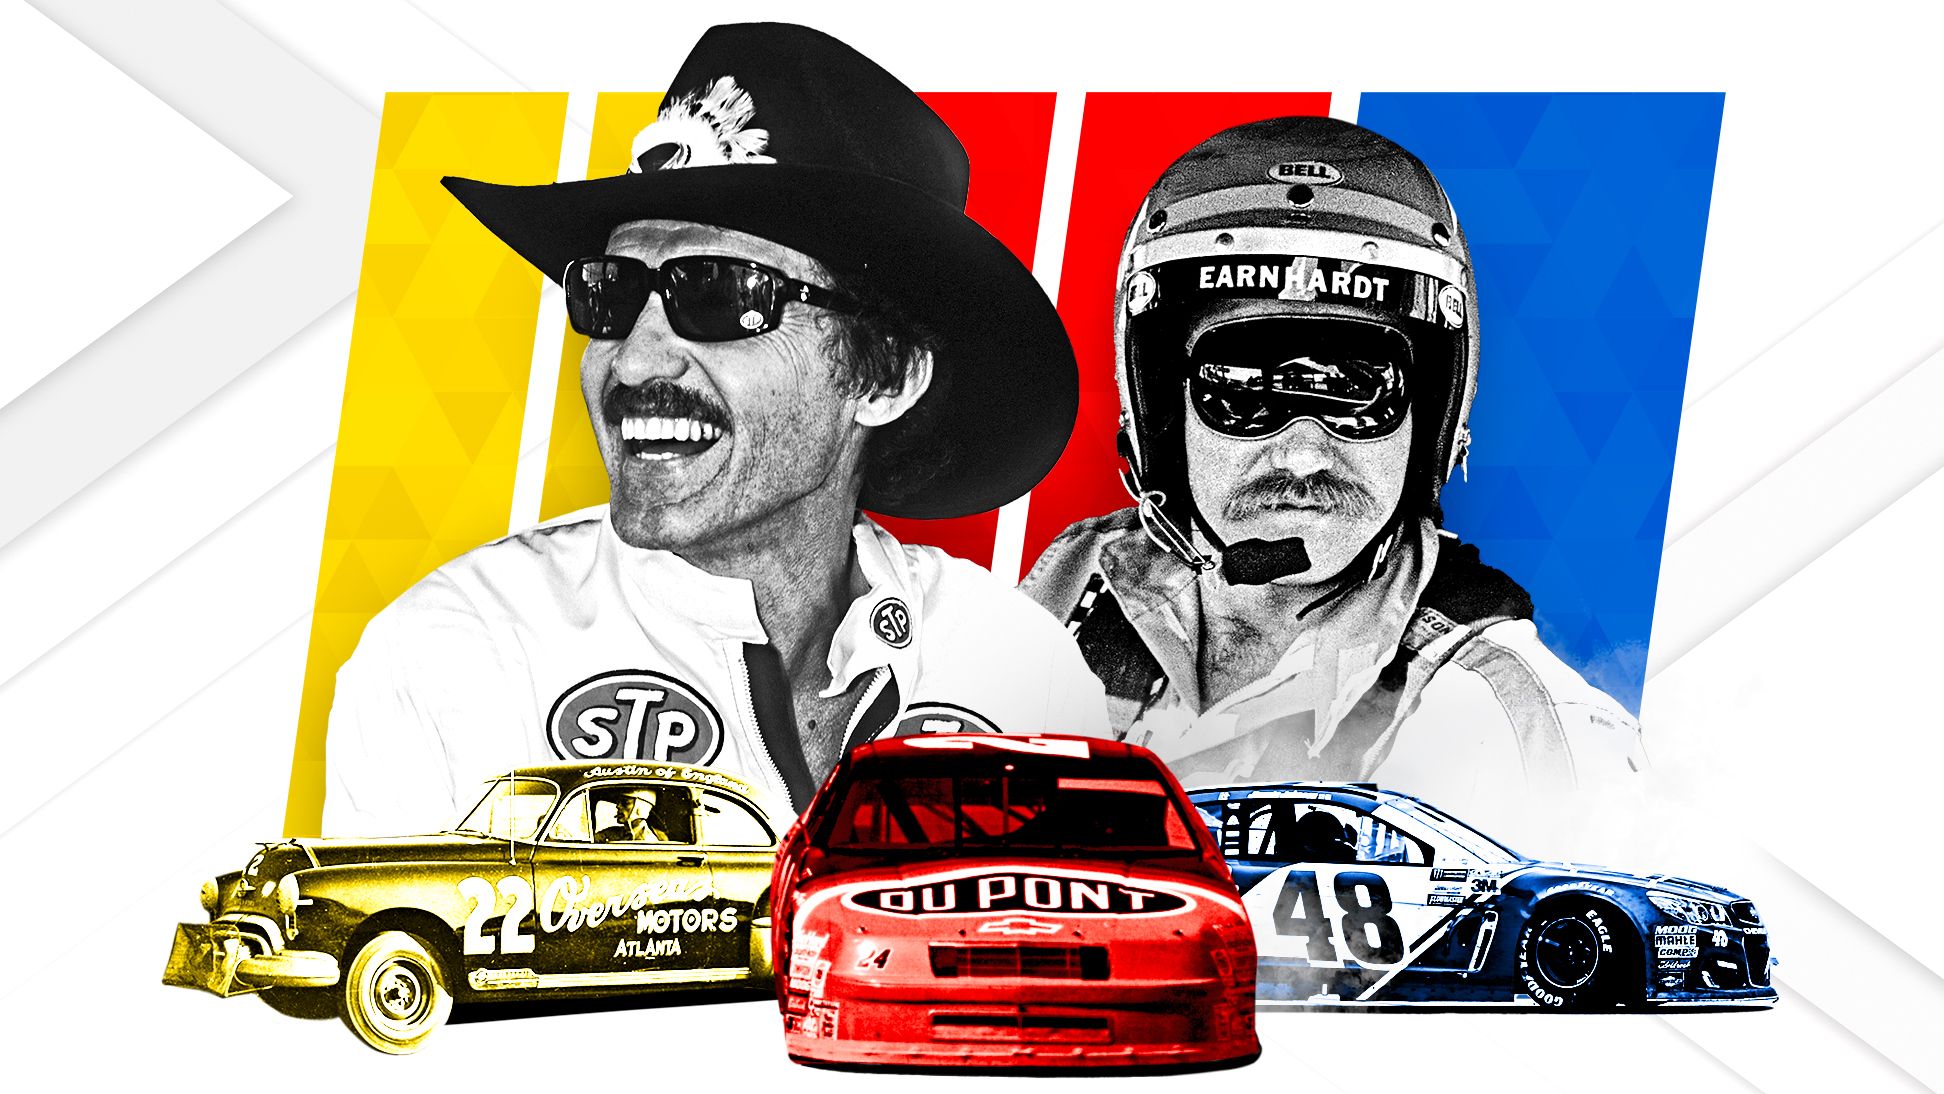 75 things for NASCAR's 75th anniversary: Best-looking cars